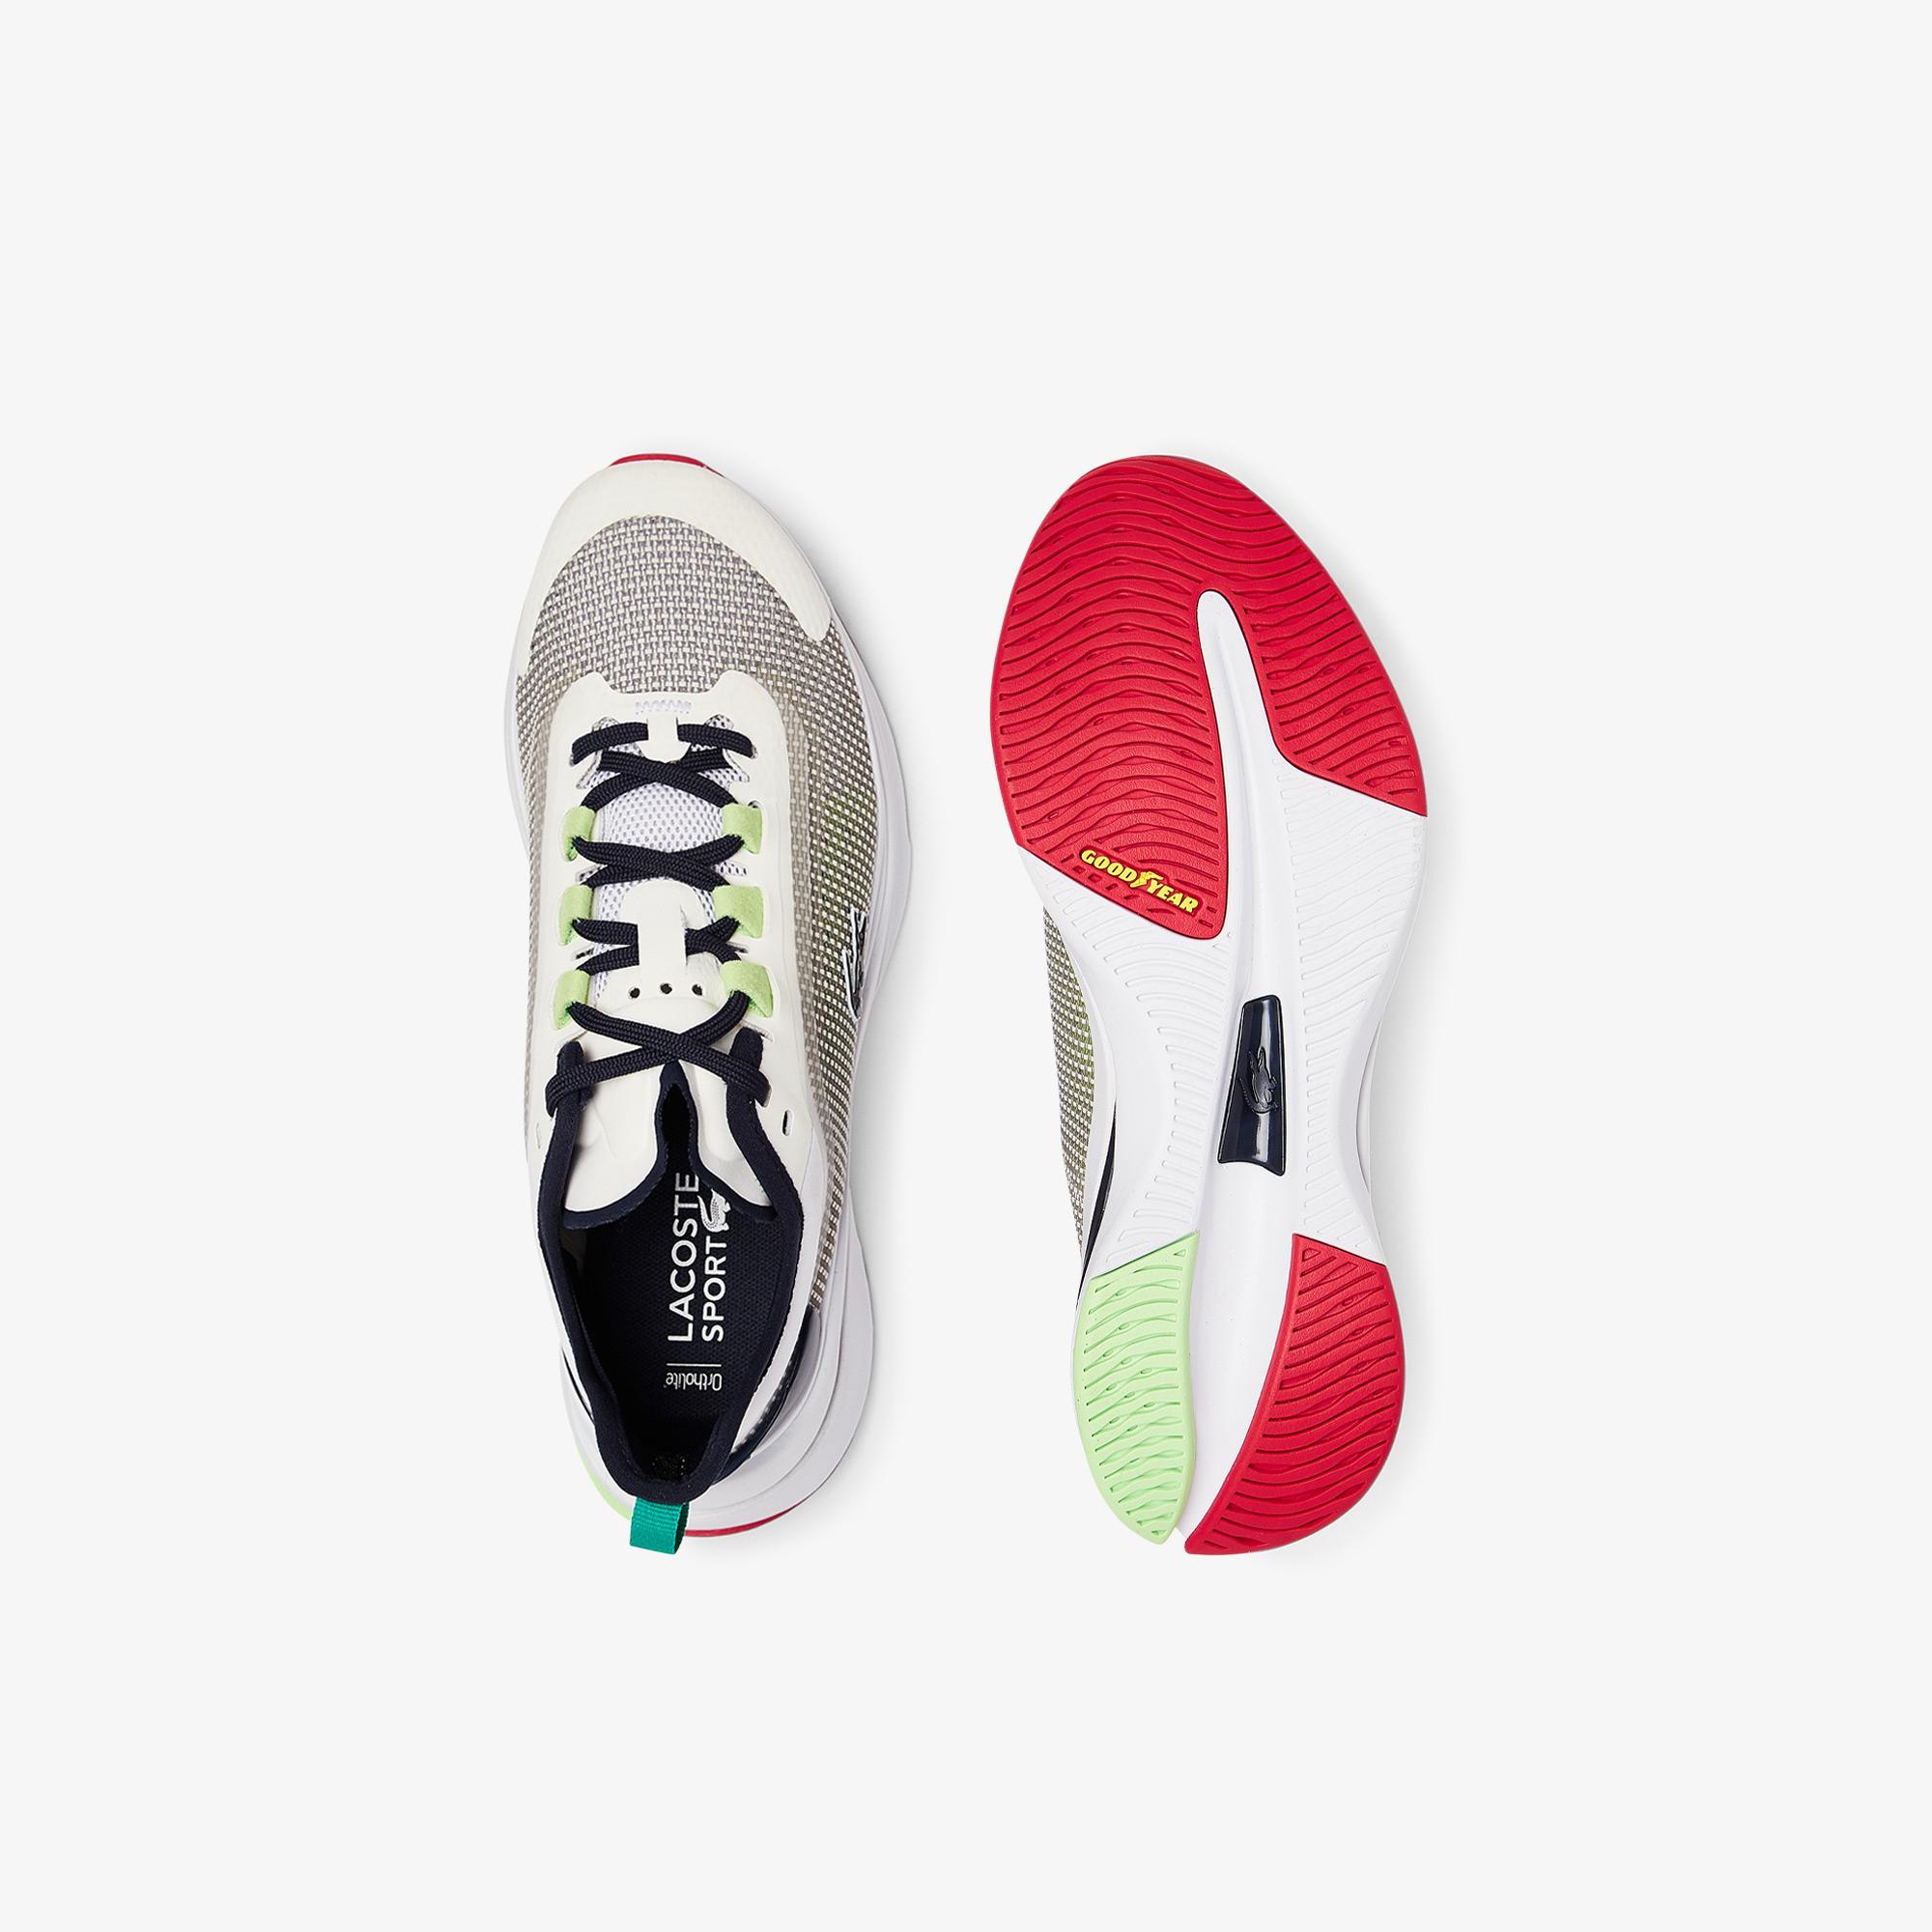 Lacoste spin. Кроссовки лакост Run Spin. Кроссовки лакост l-Spin. Lacoste Run Spin GTX. Run Spin Ultra 0921 1 sma.